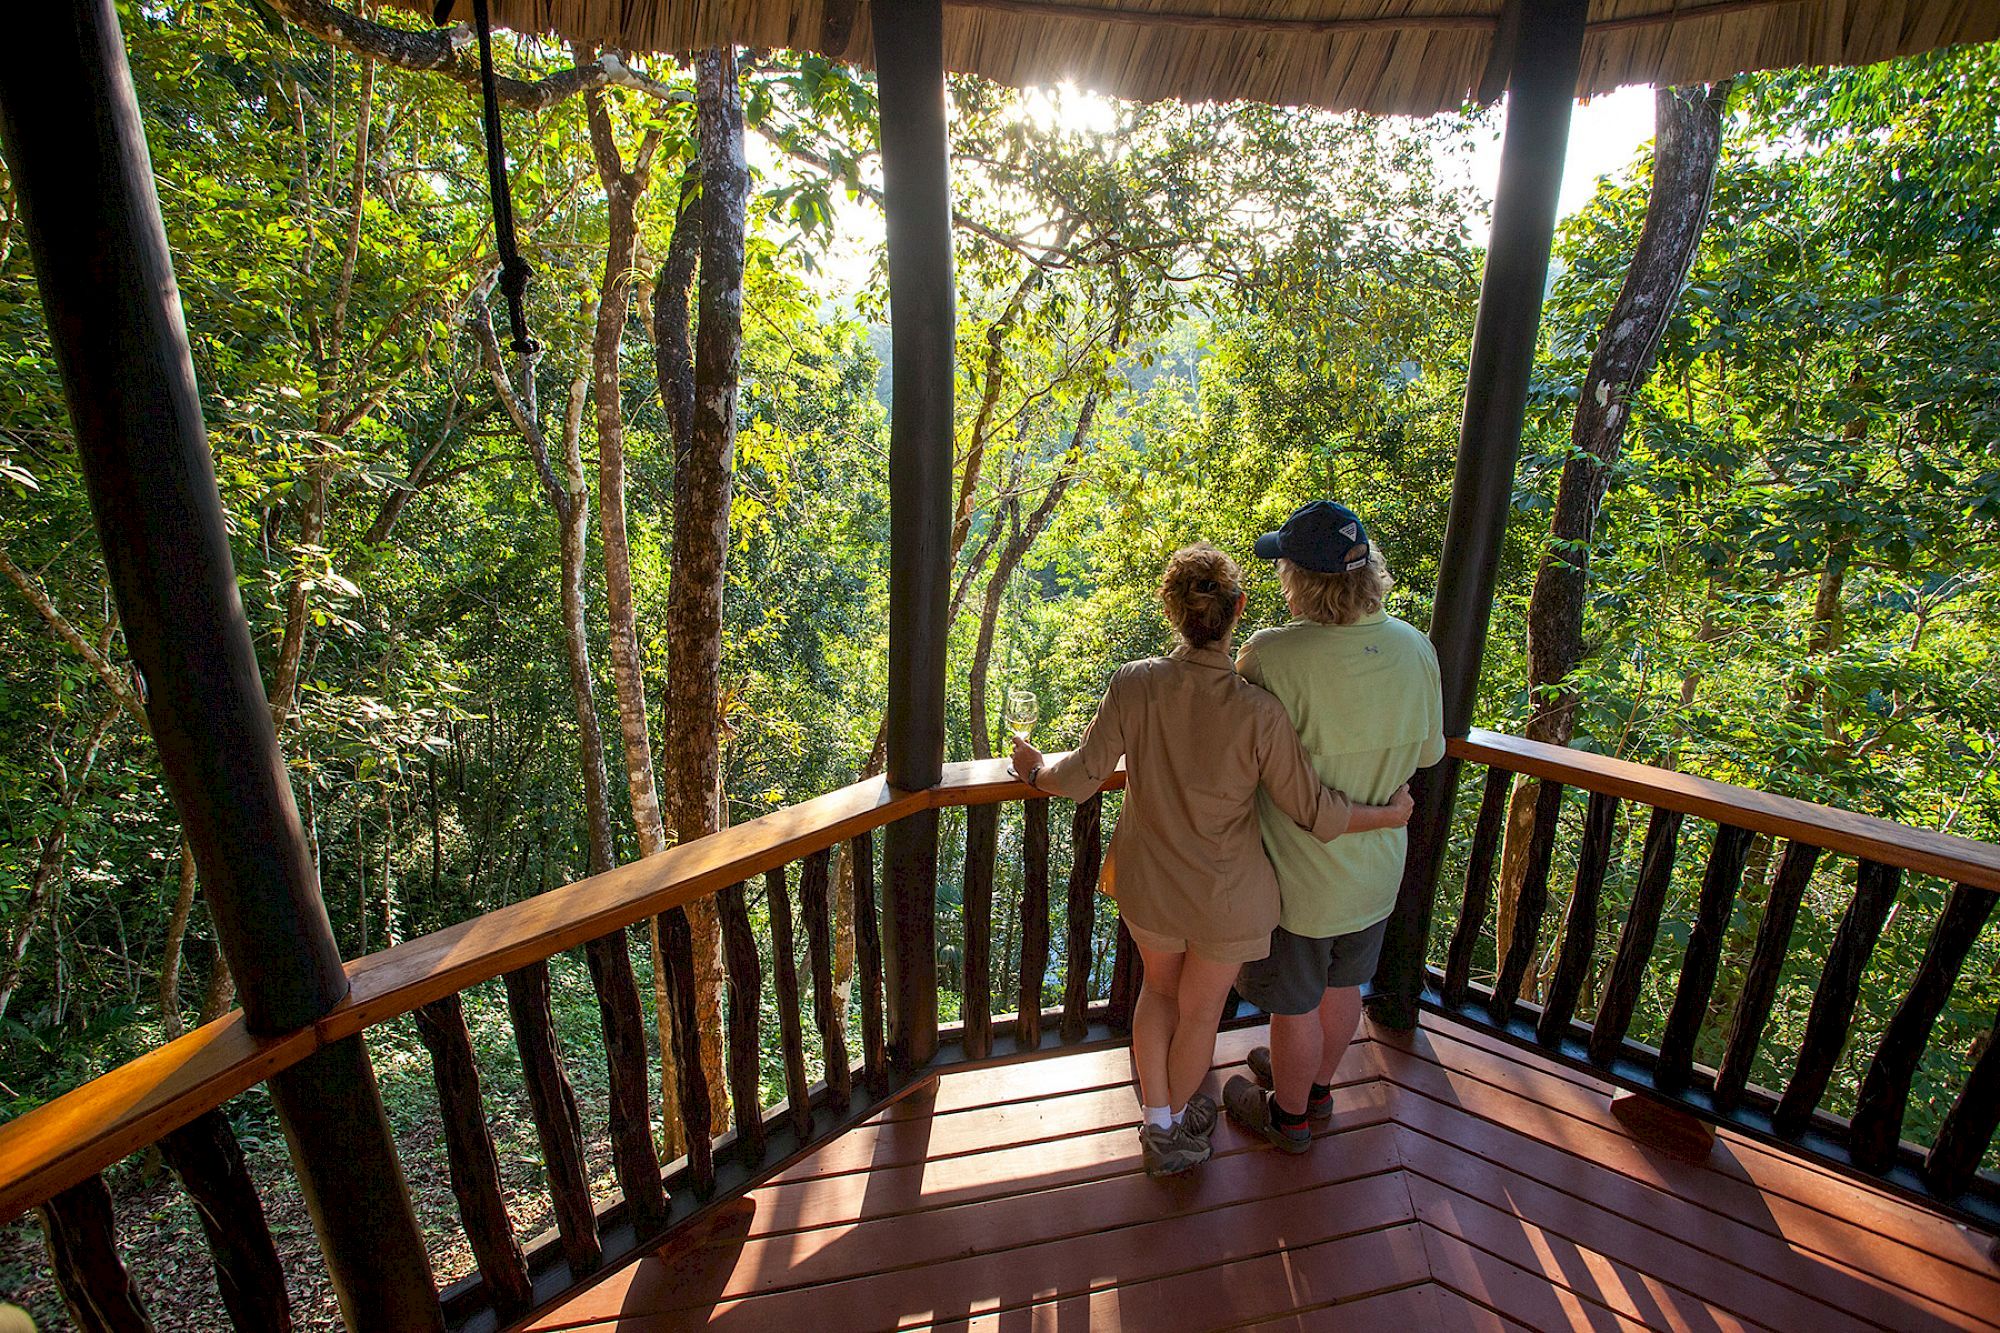 Two people stand on a wooden balcony, overlooking a lush, green forest under sunlight, creating a serene and peaceful scene.